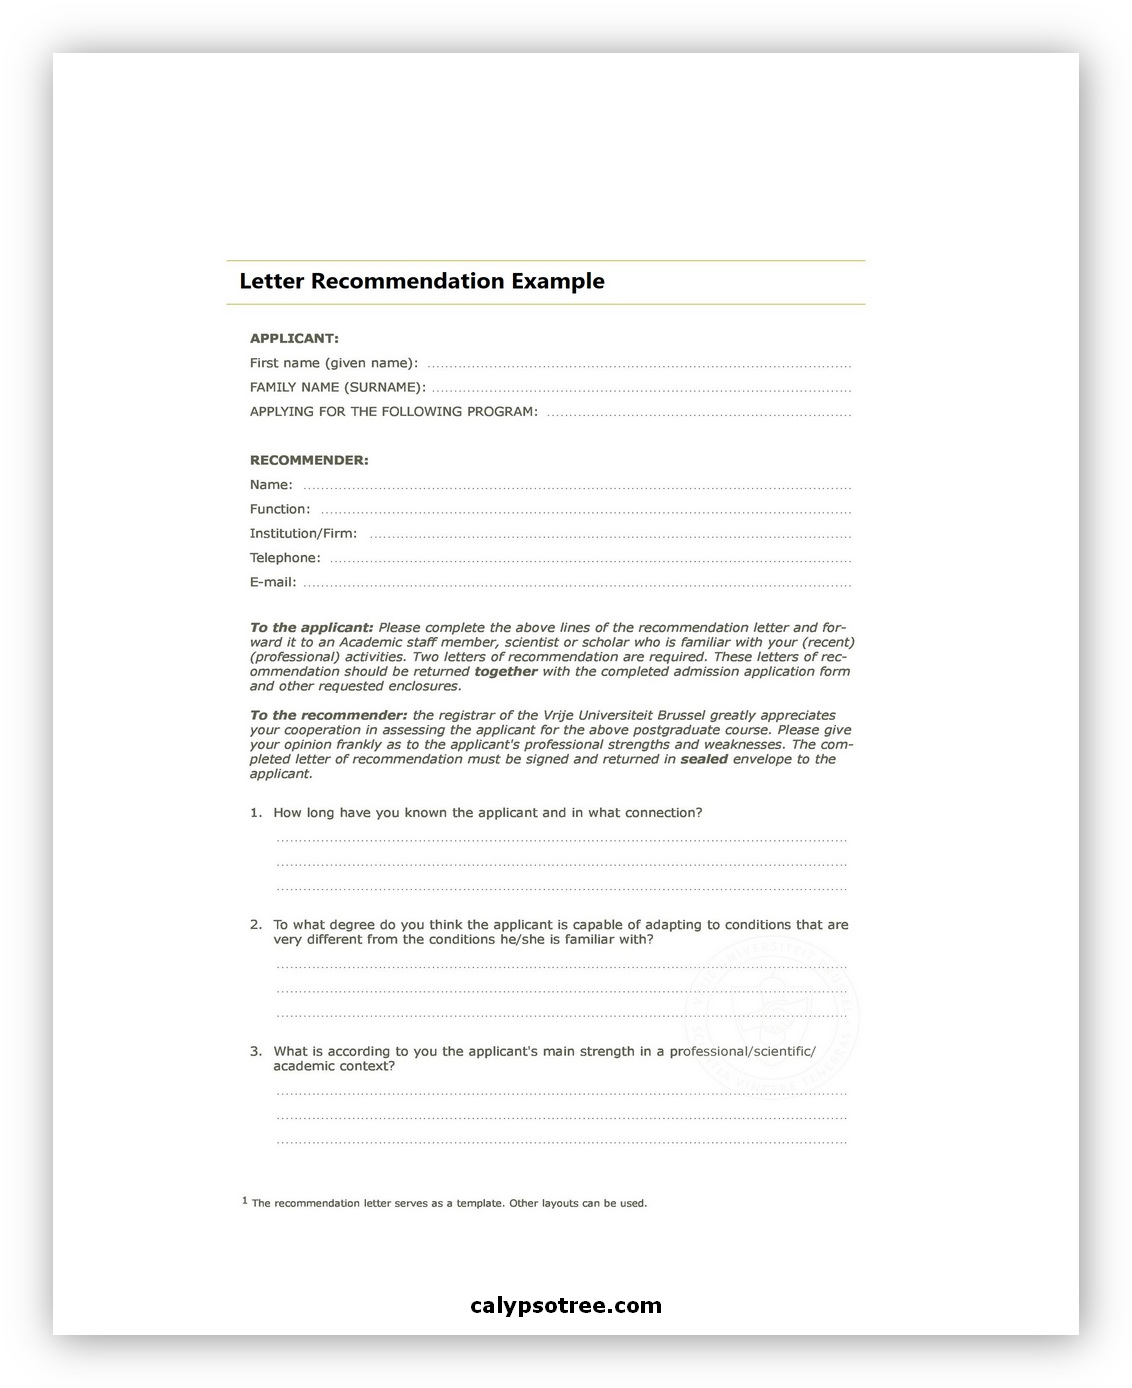 Letter Recommendation Example 02